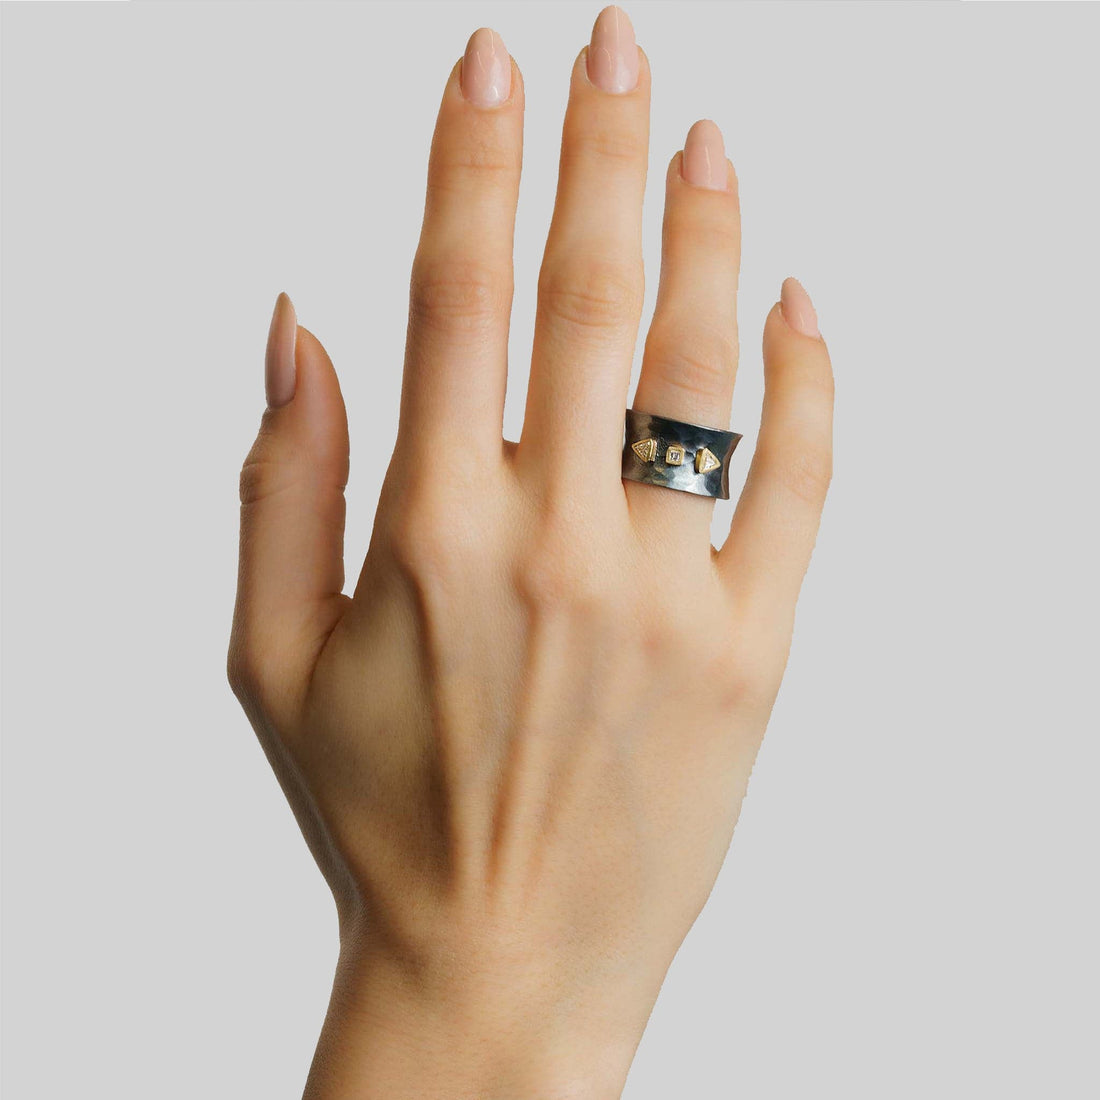 Oxidized Silver Concave Diamond Band Ring by Lika Behar modeled